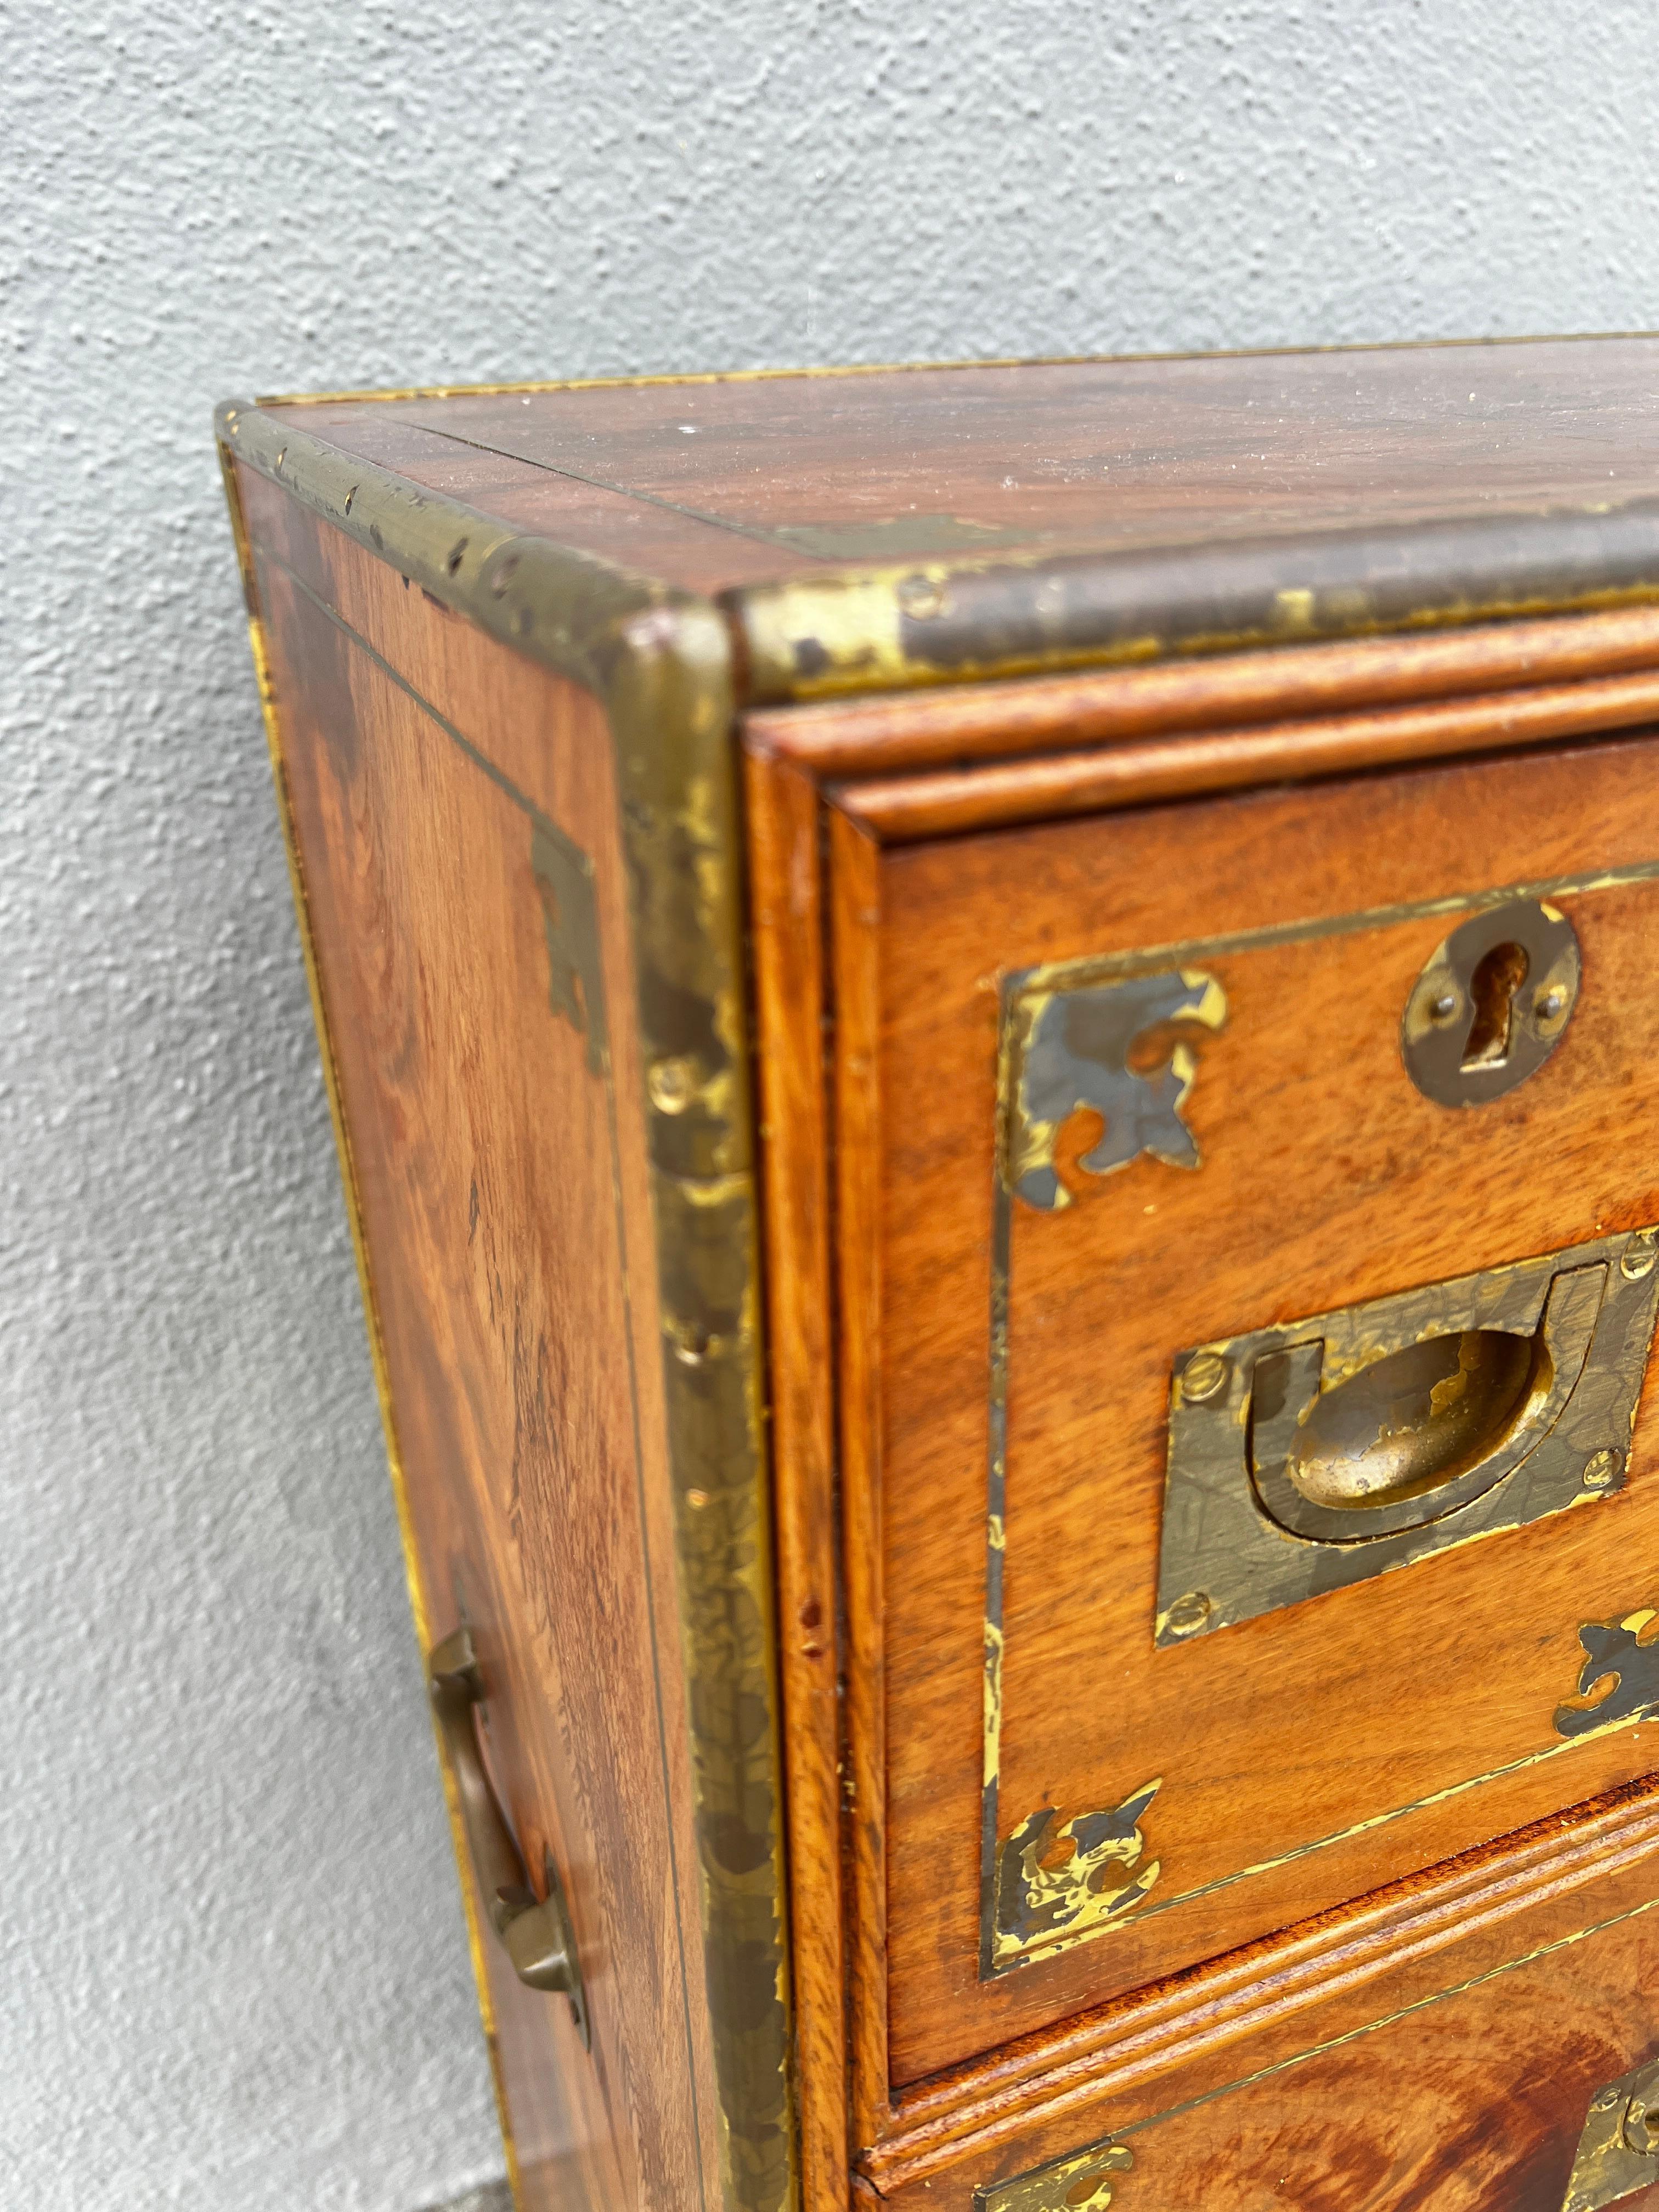 Anglo Raj Regency Campaign Chest with Desk Trimmed in Brass Banding Accents 1811 For Sale 8